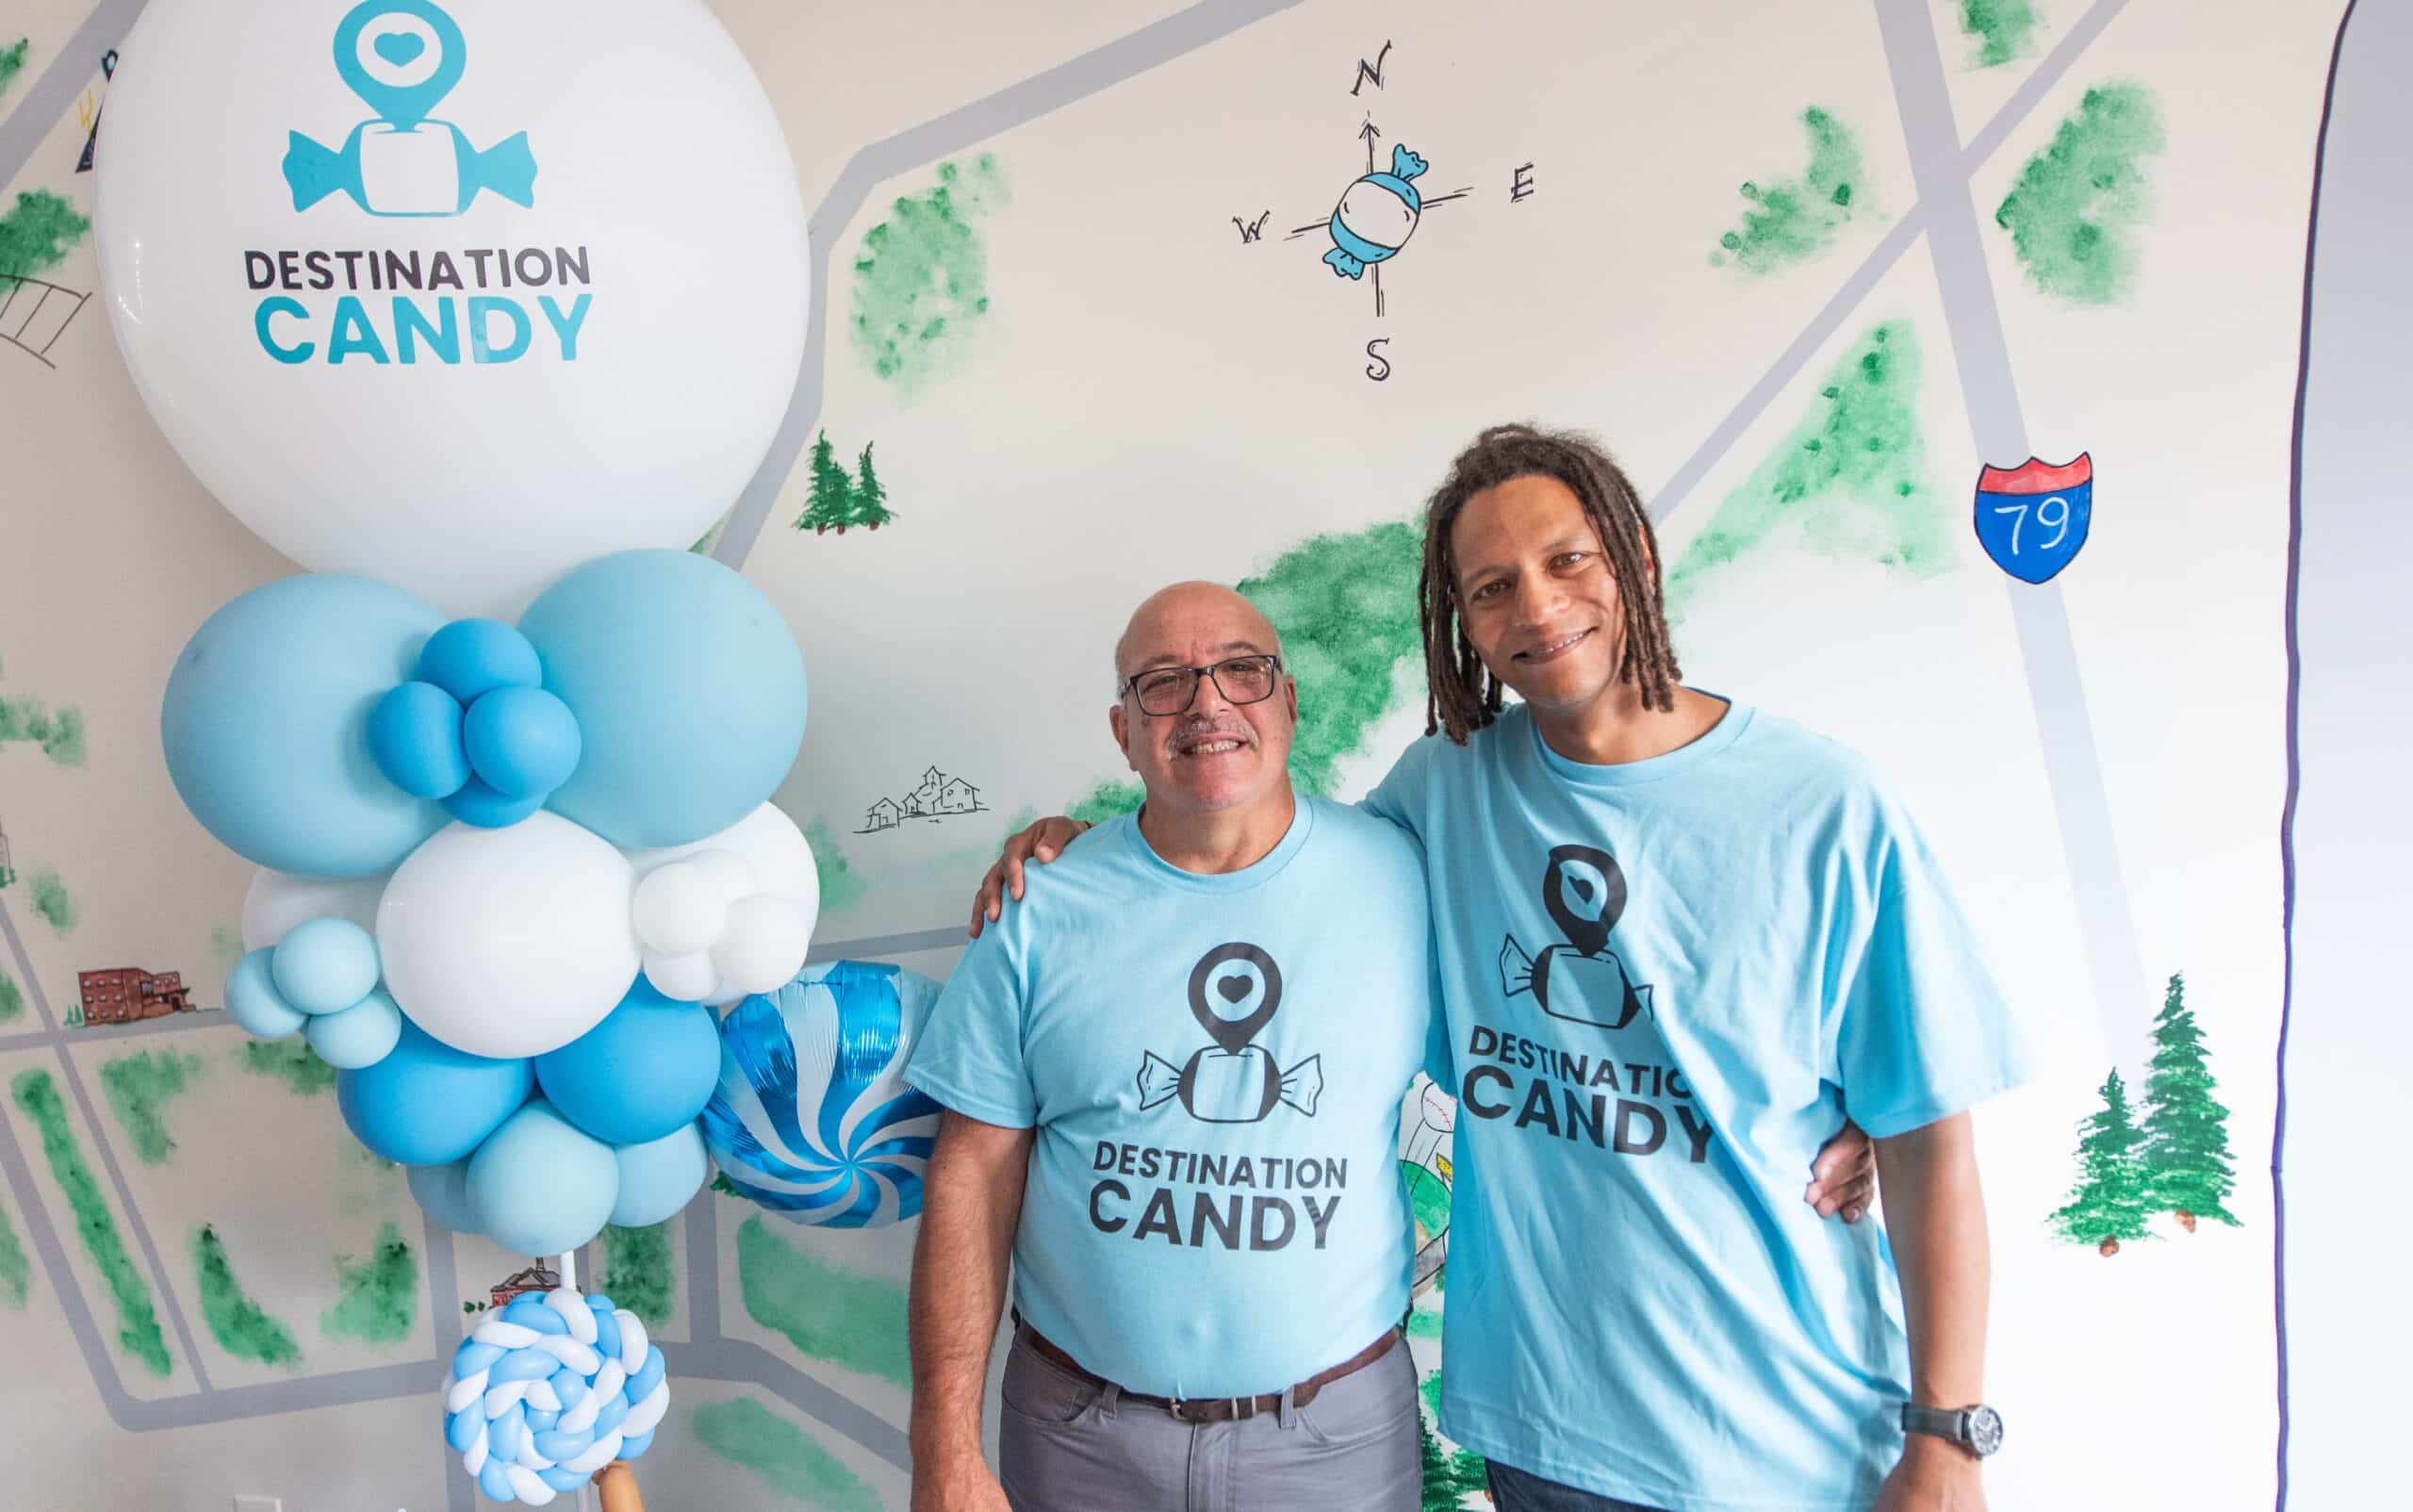 Phil and Chris grand opening of candy location in Pennsylvania